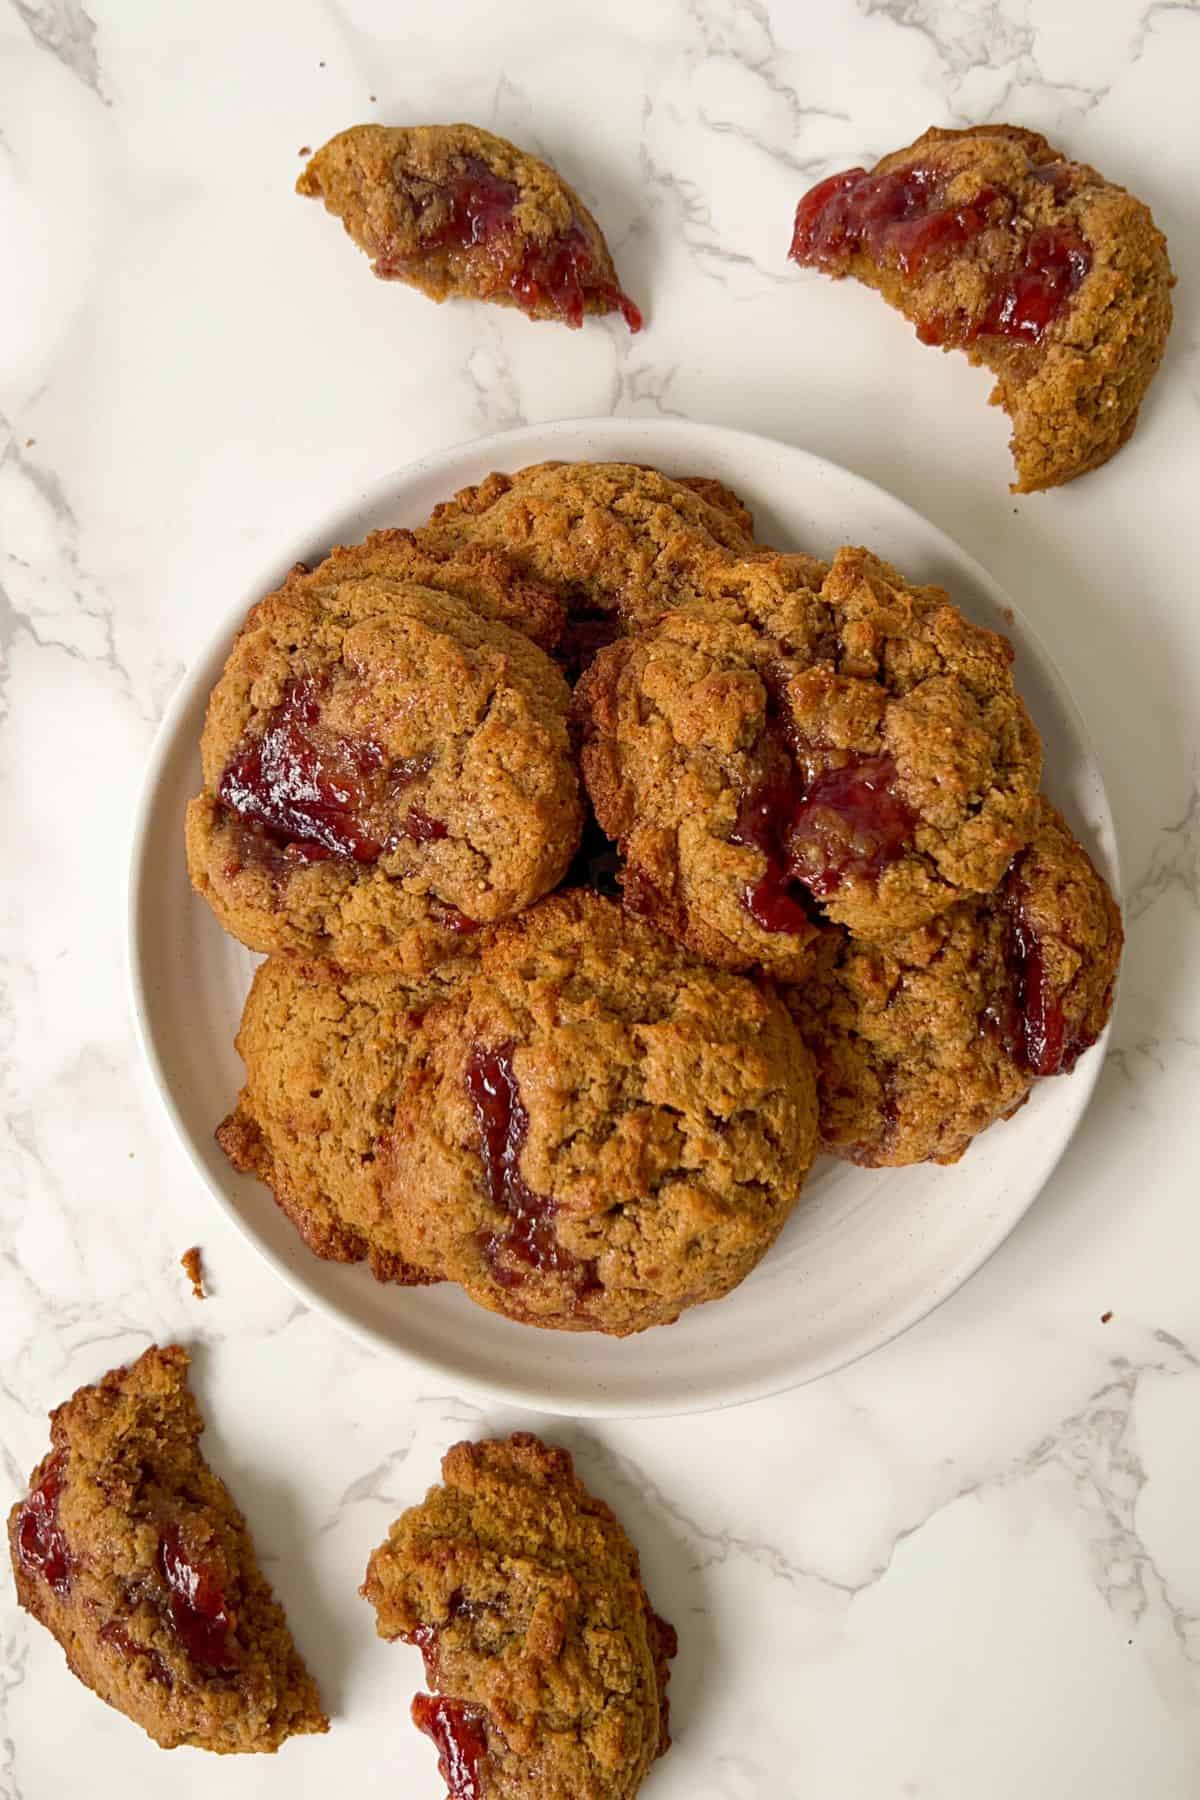 peanut butter jam drop cookies on a plate surrounded by broken cookies